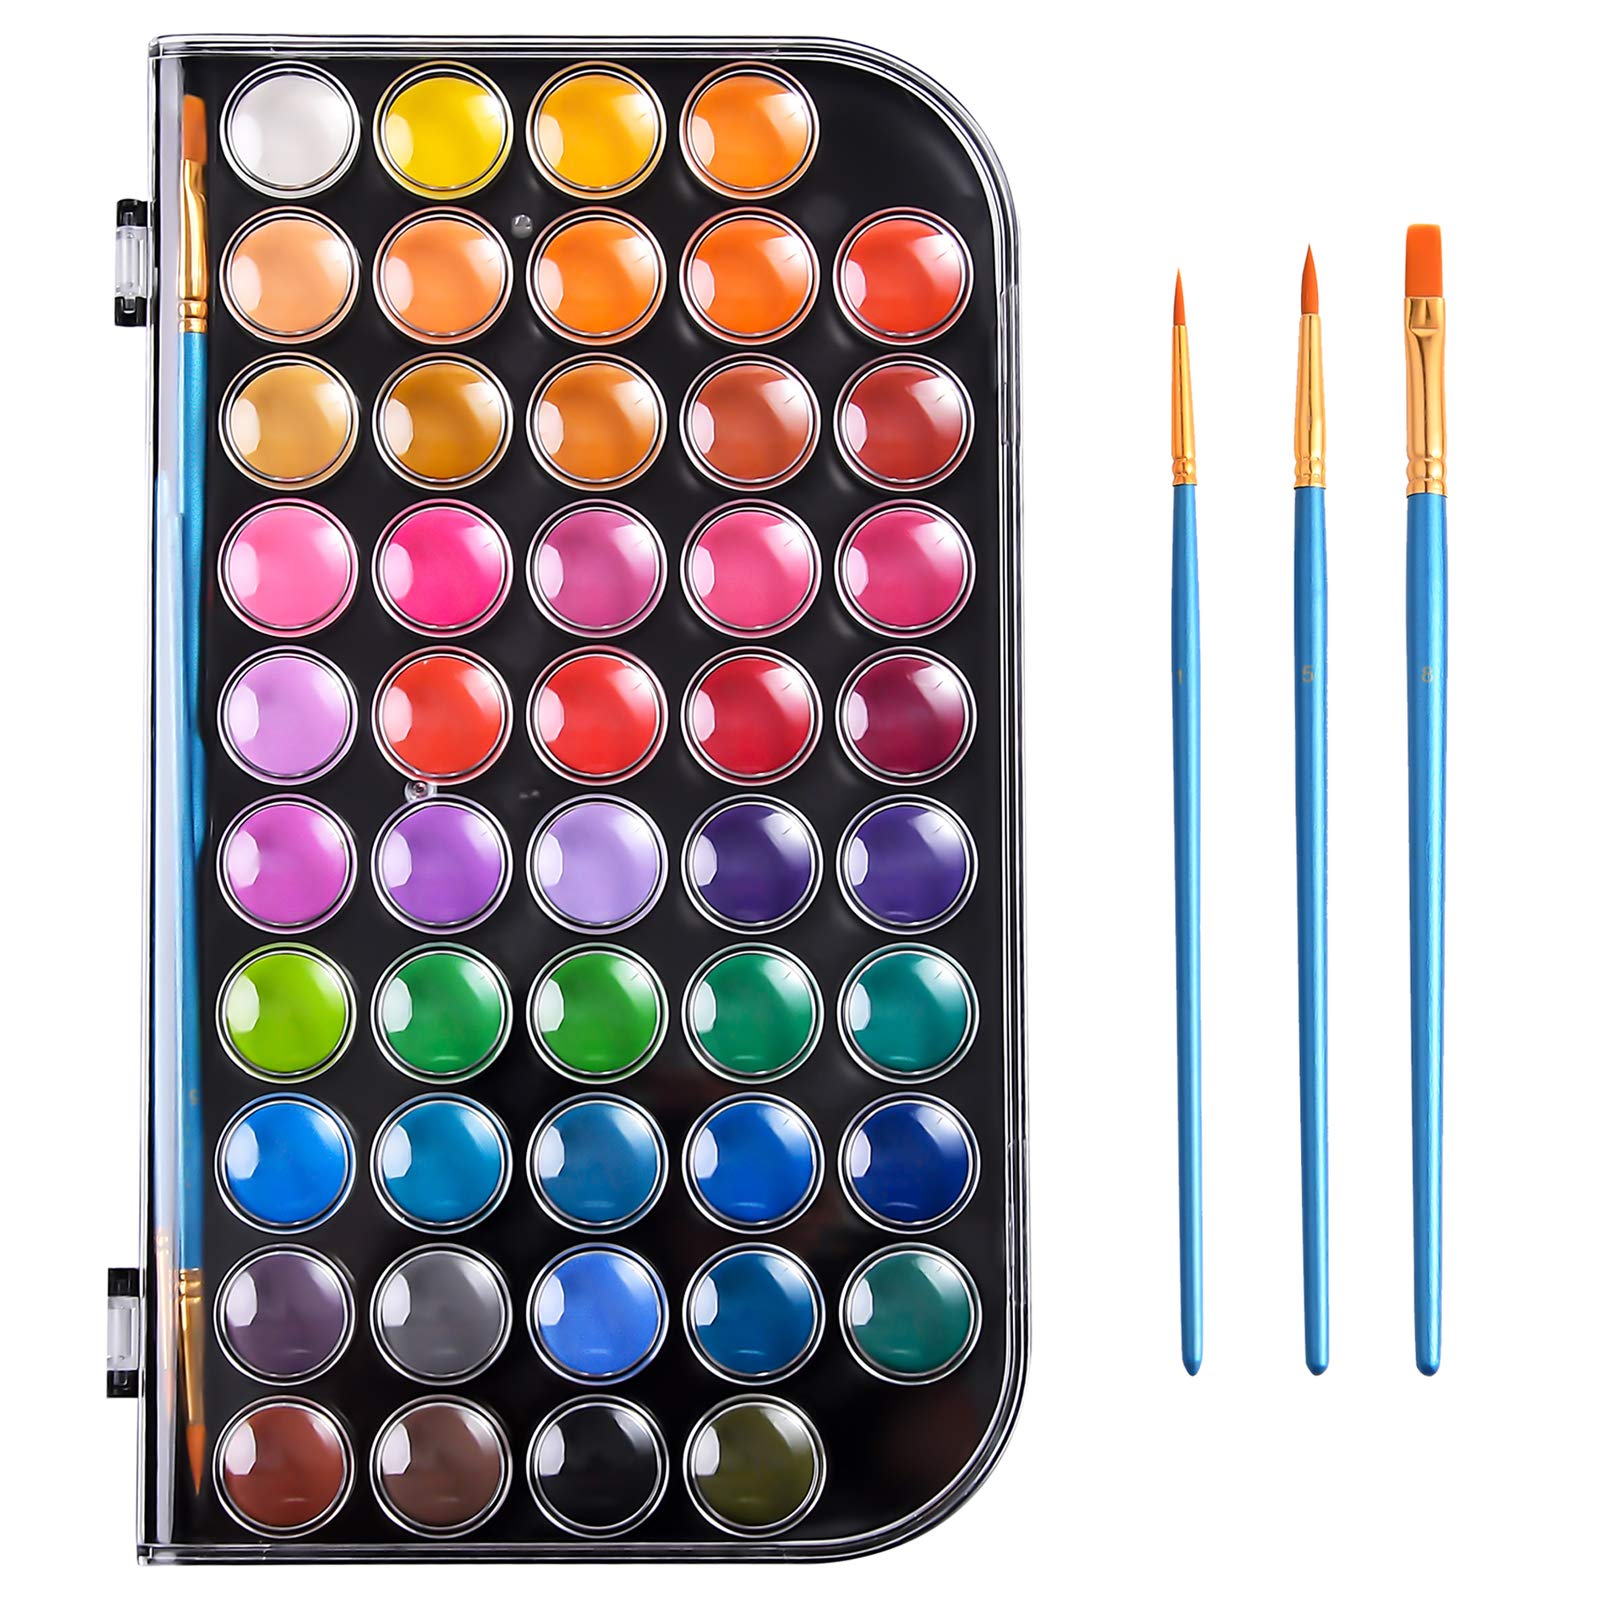 Upgraded 48 Colors Watercolor Paint Washable Watercolor Paint Set with 3  Paint Brushes and Palette Non-toxic Water Color Paints Sets for Kids Adults  Beginners and Artists Make Your Painting Talk